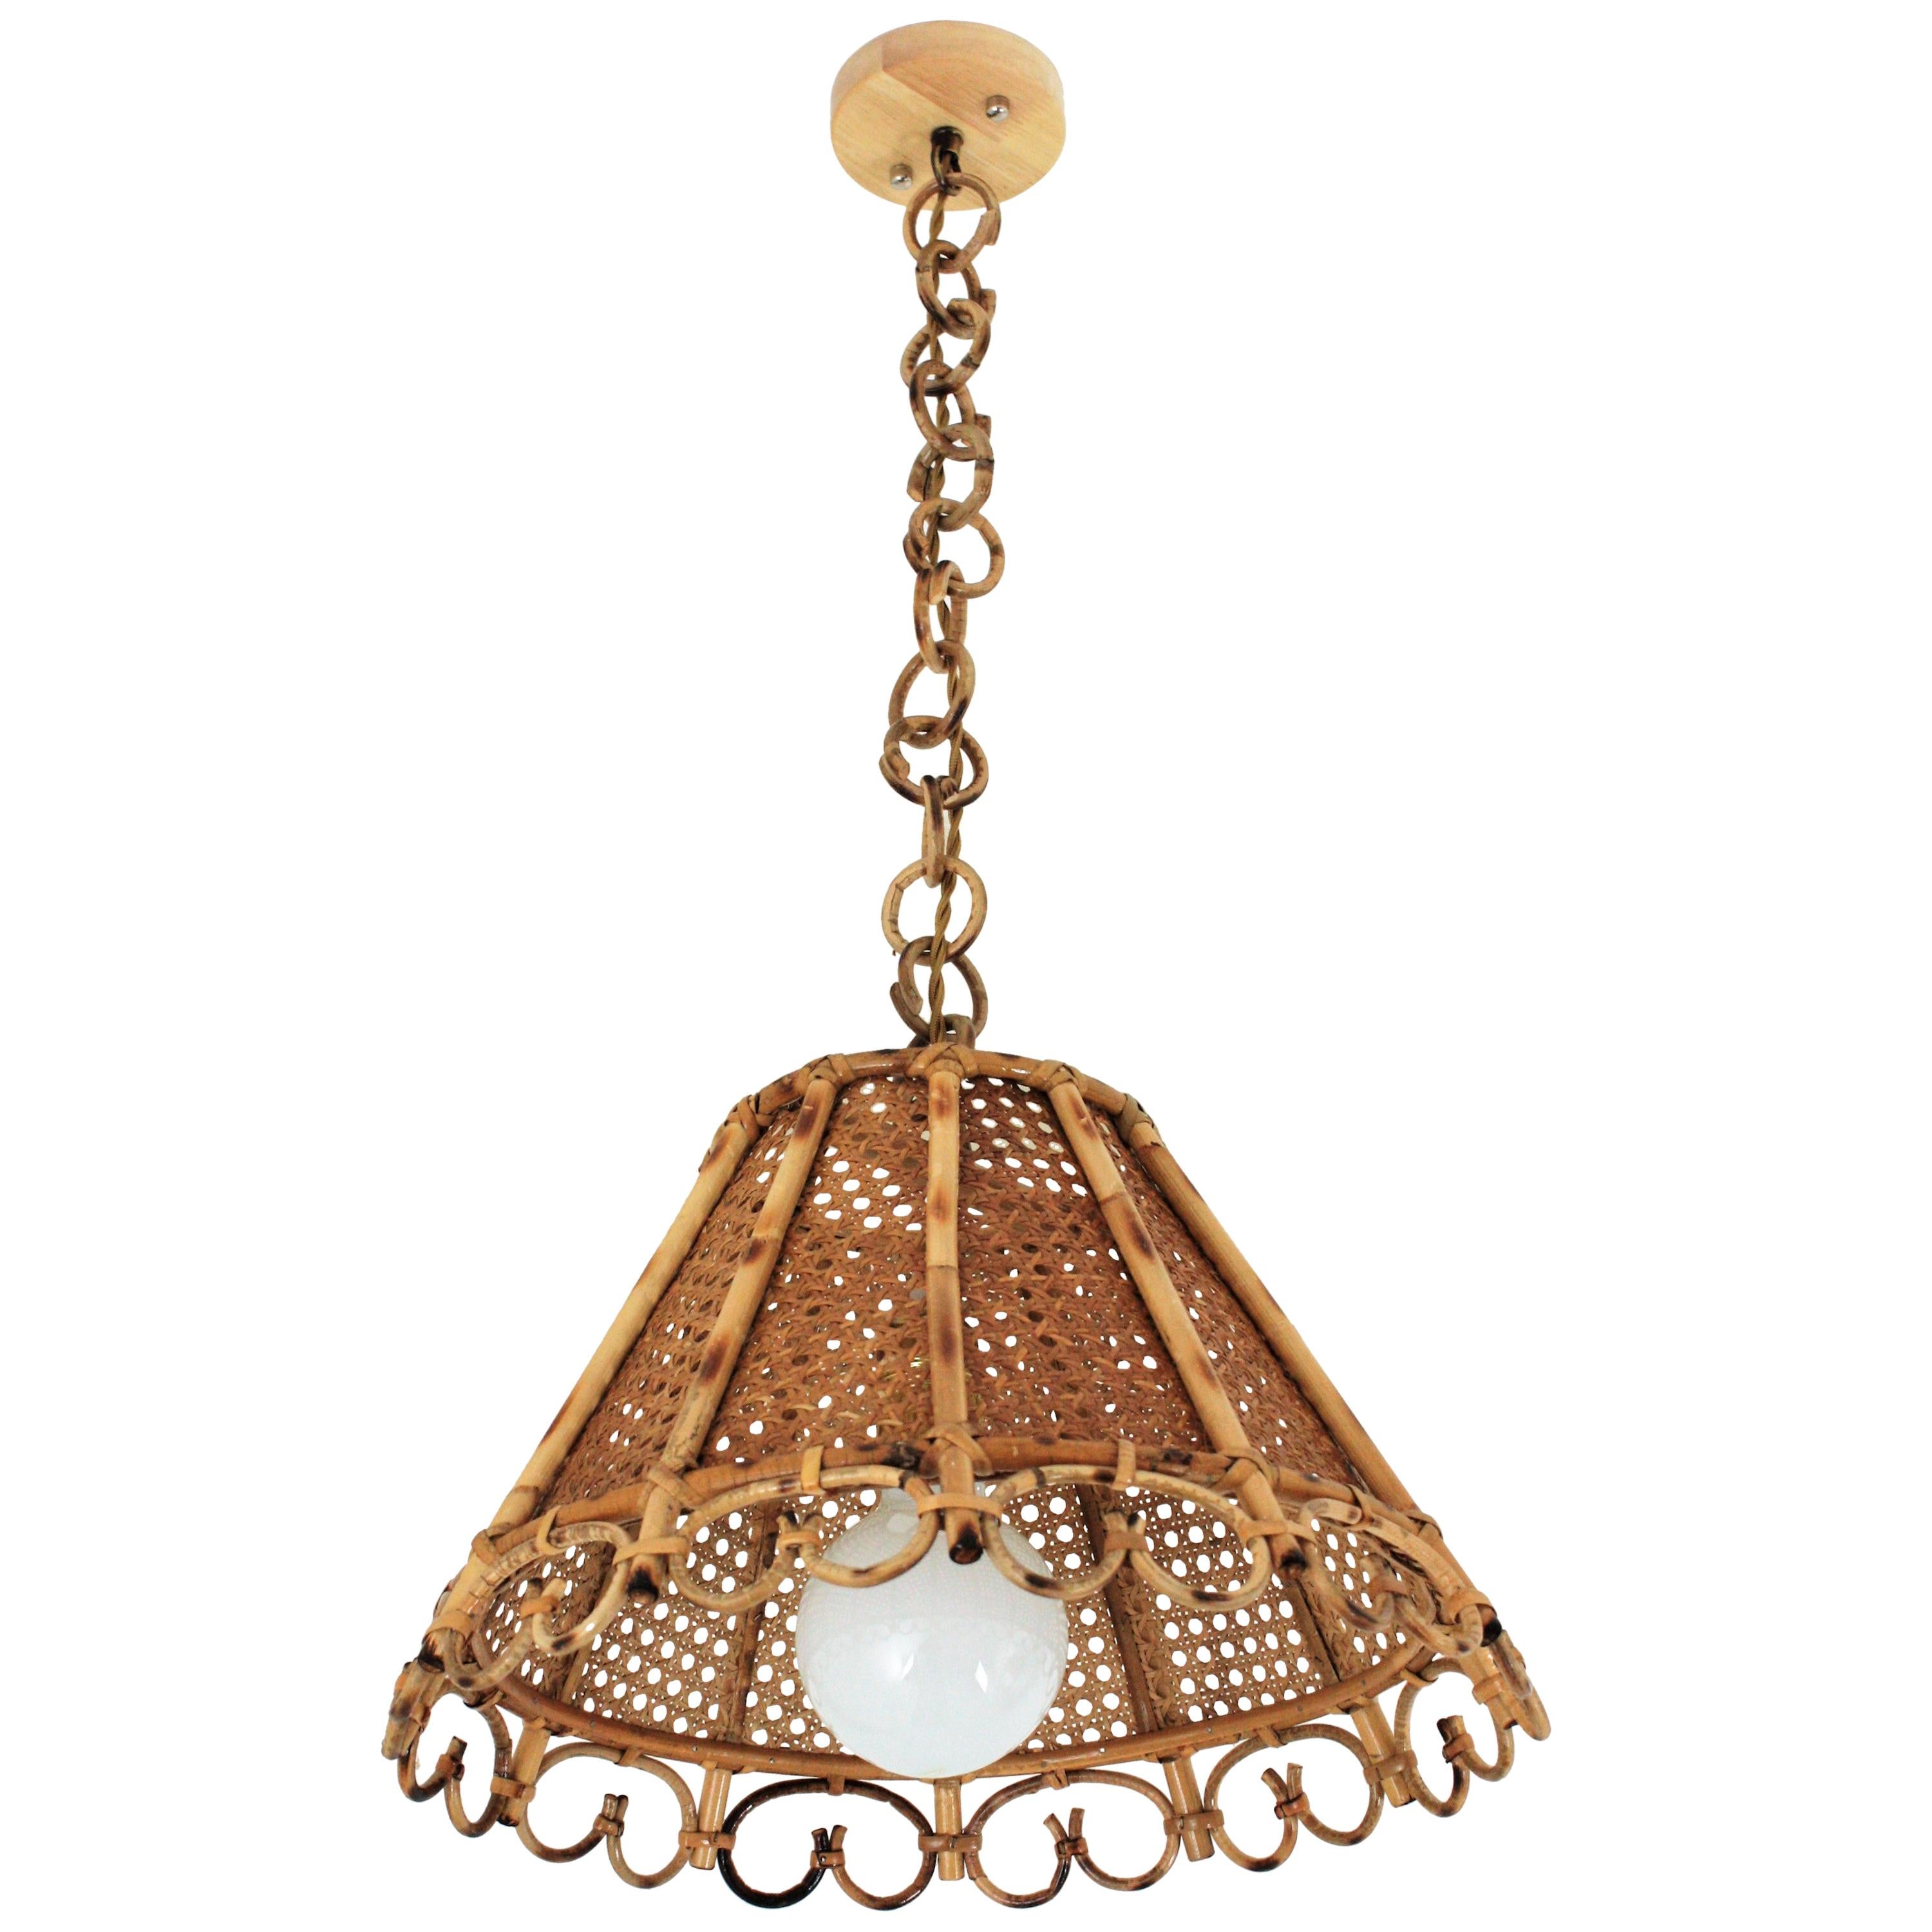 Rattan and Wicker Wire Italian Modernist Conic Pendant / Hanging Light, 1960s